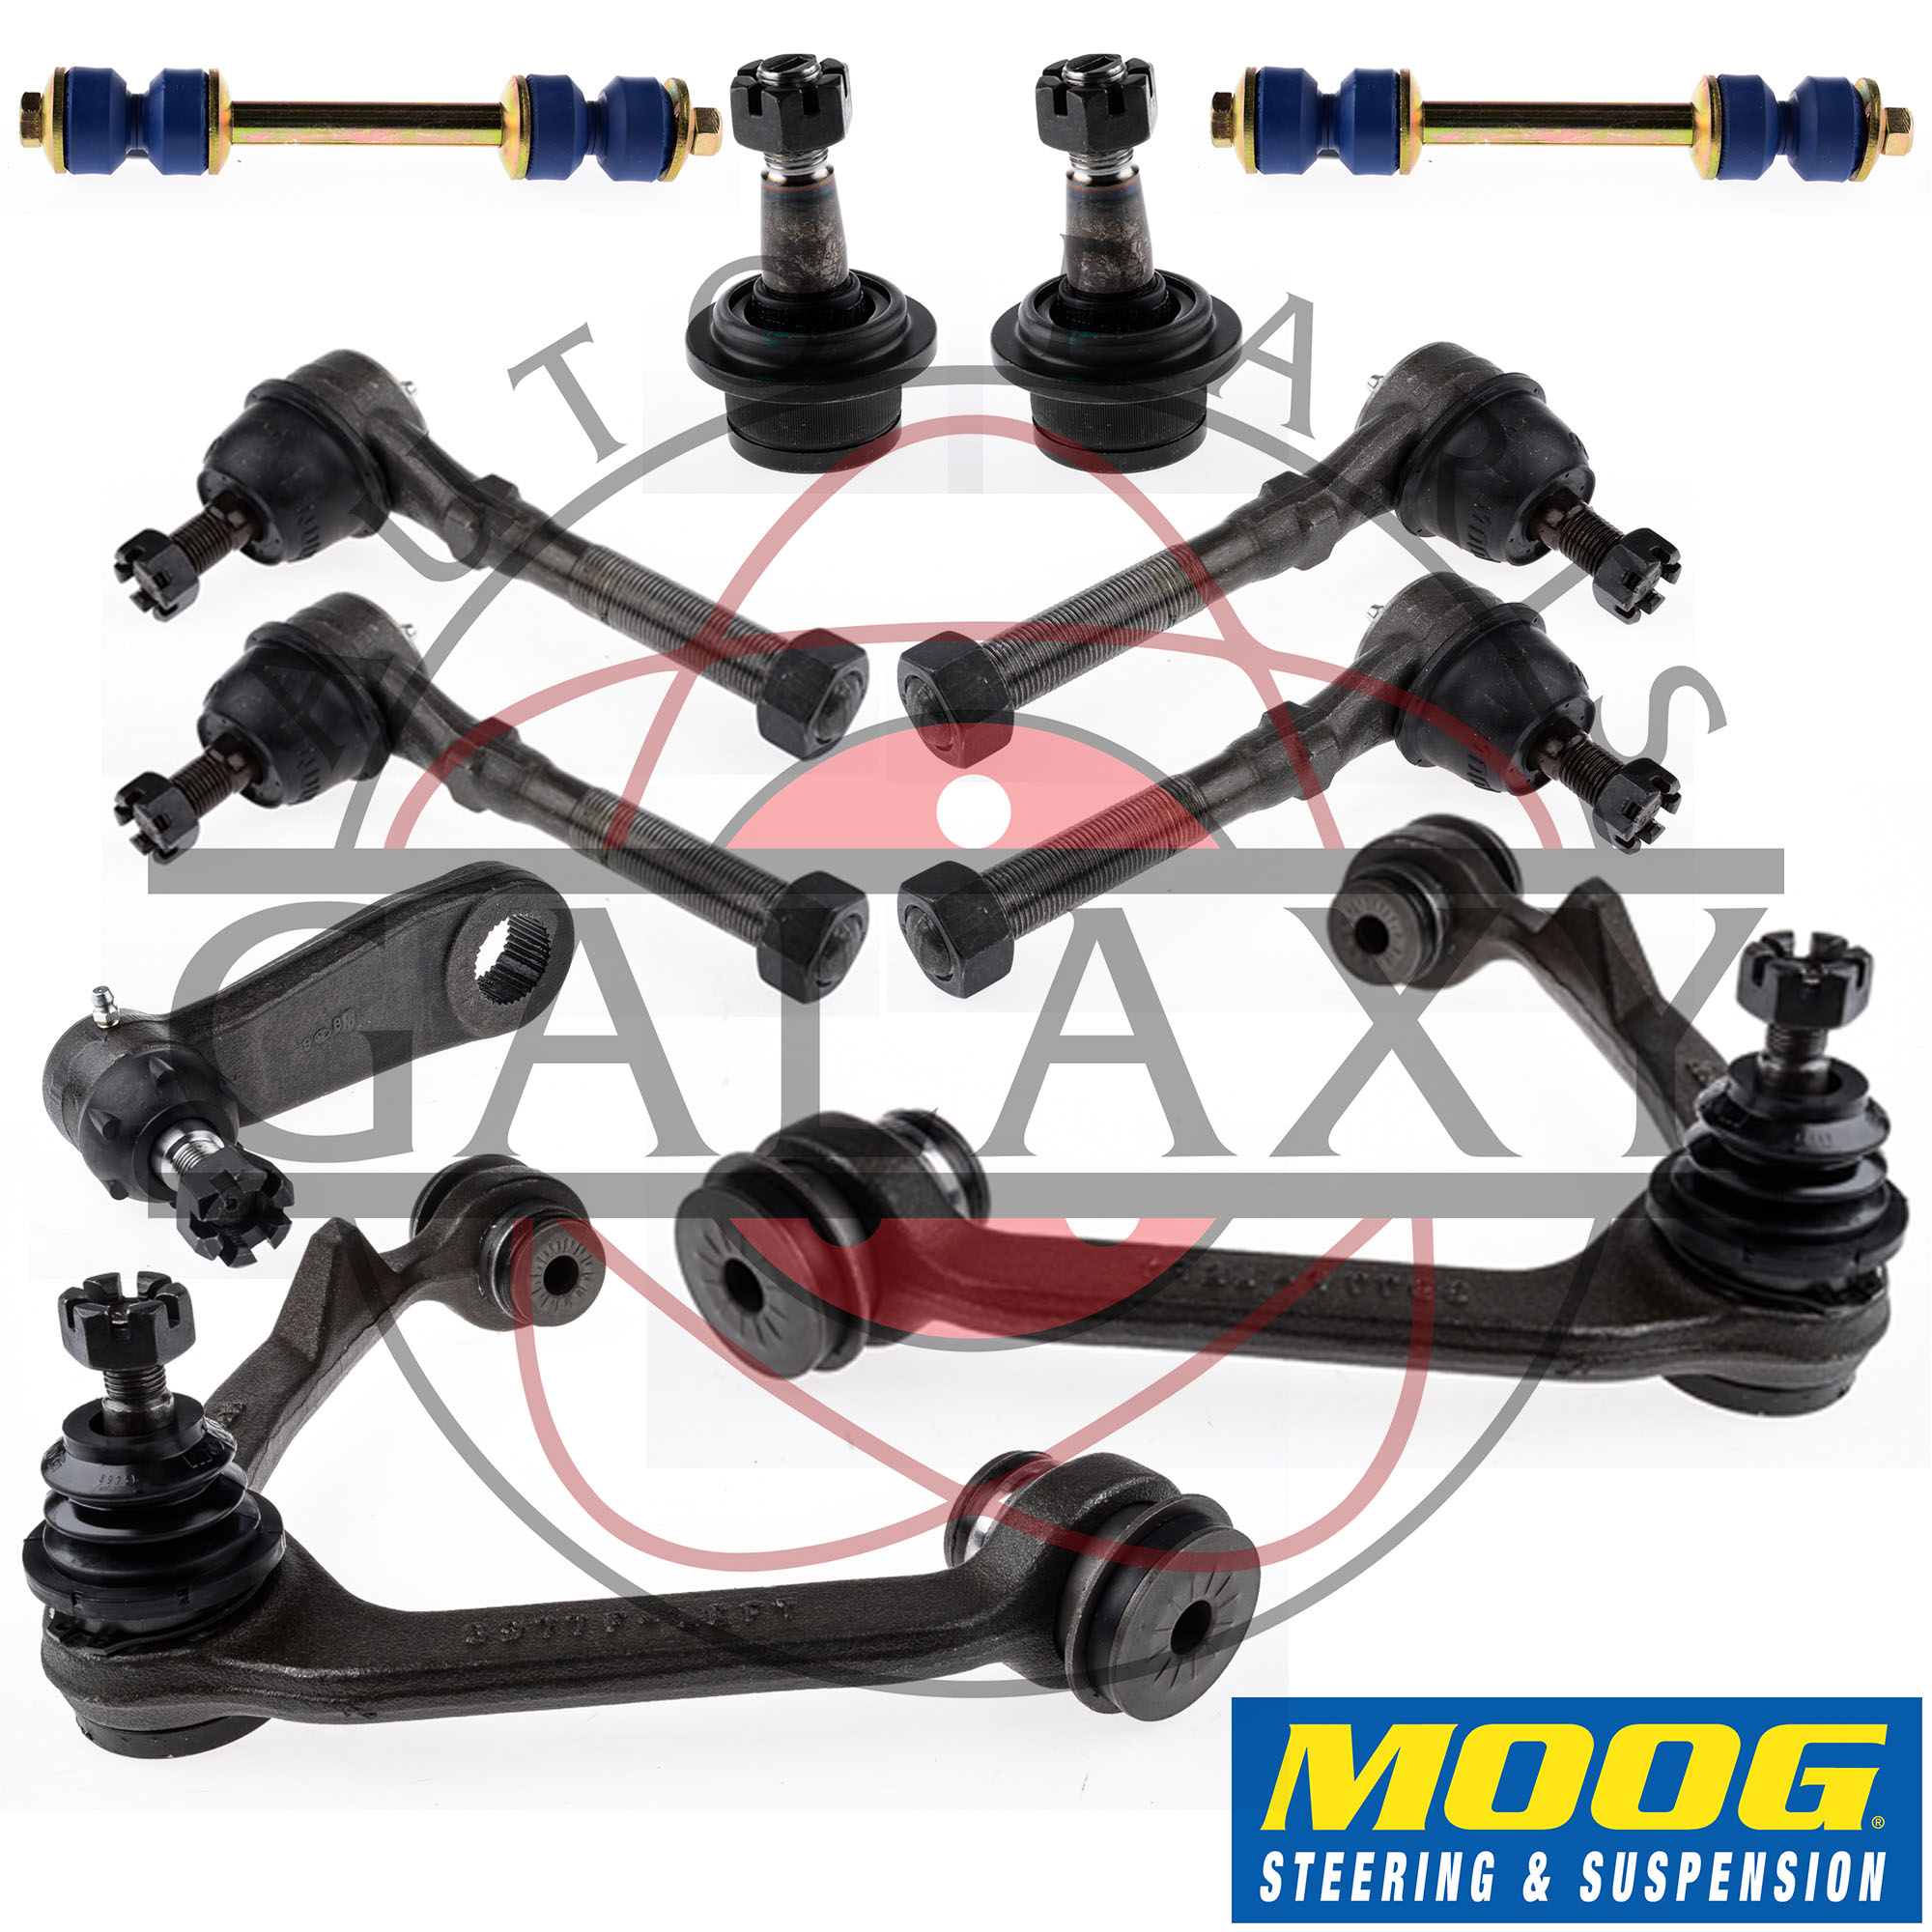 Moog Replacement Front Suspension Pcs Kit For Ford Full Size Truck